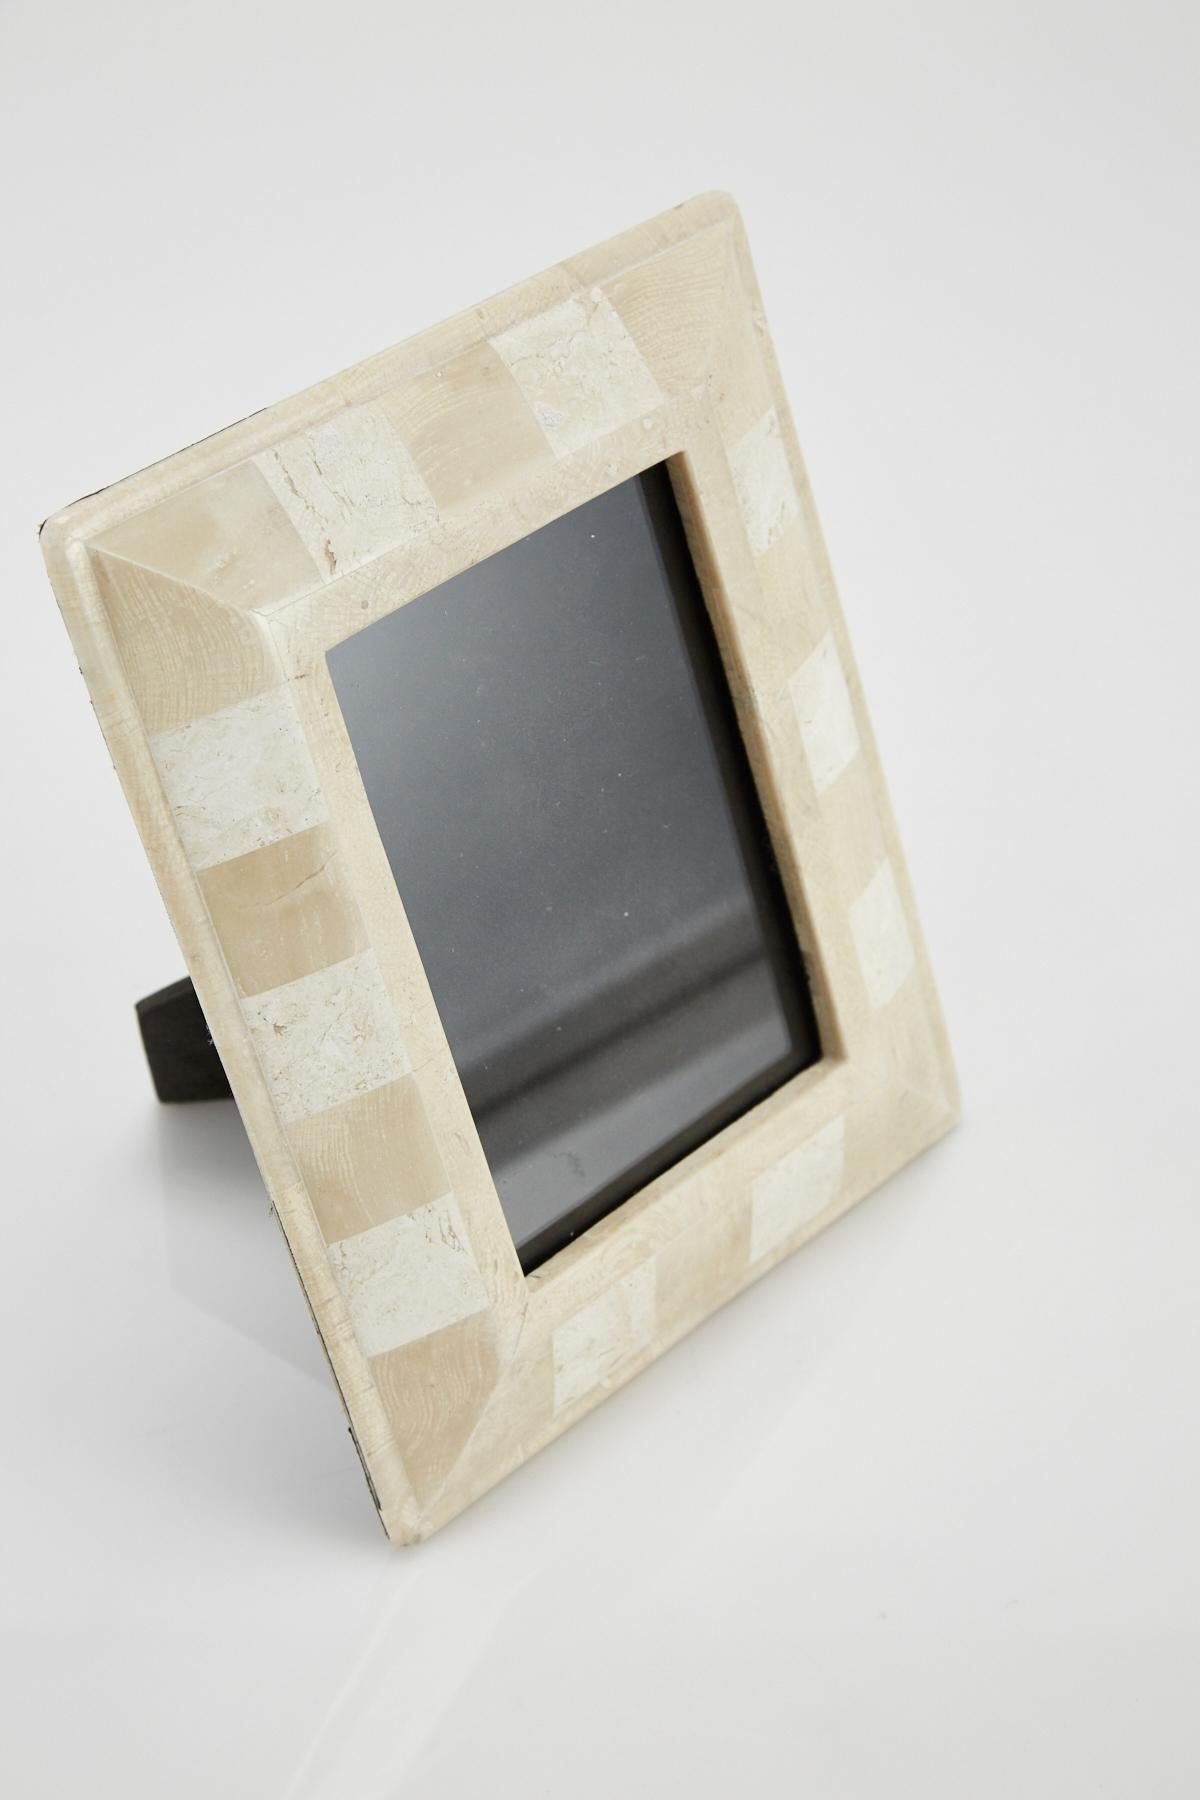 Postmodern White and Beige Checkered Tessellated Stone Picture Frame, 1990s (Postmoderne) im Angebot